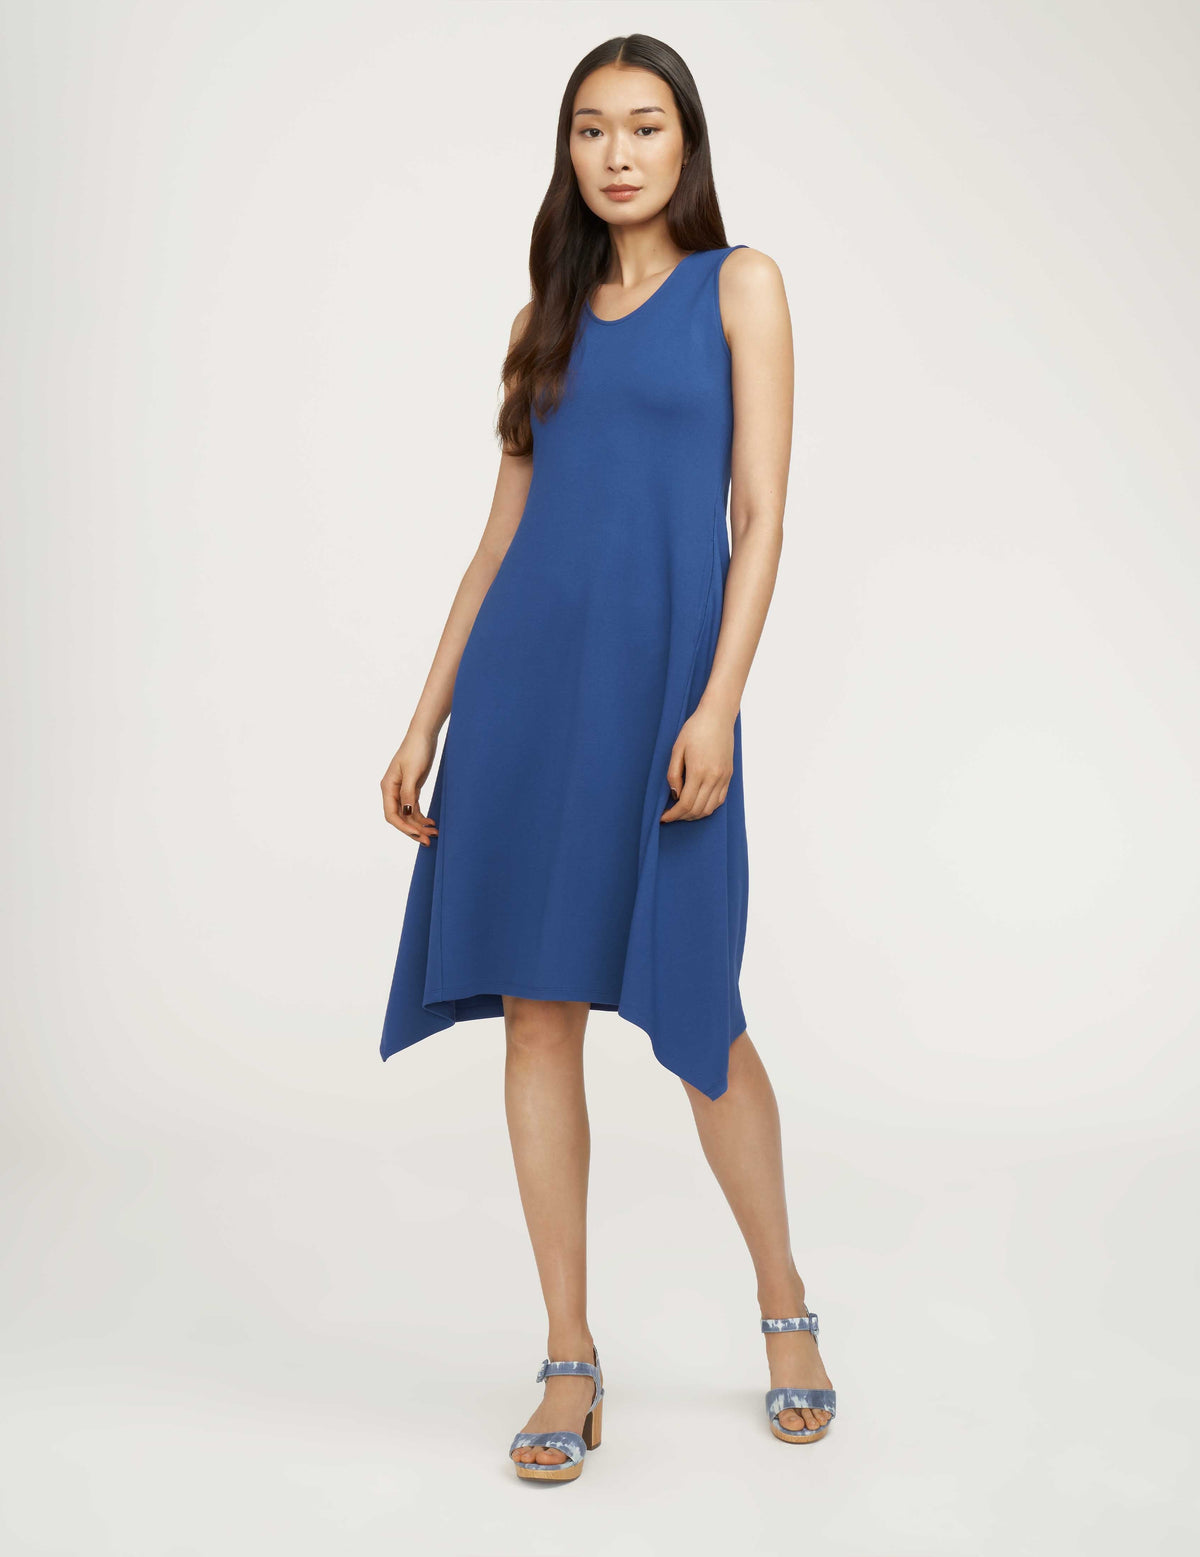 Anne Klein Magritte Blue Serenity Knit Gusset Dress- Clearance